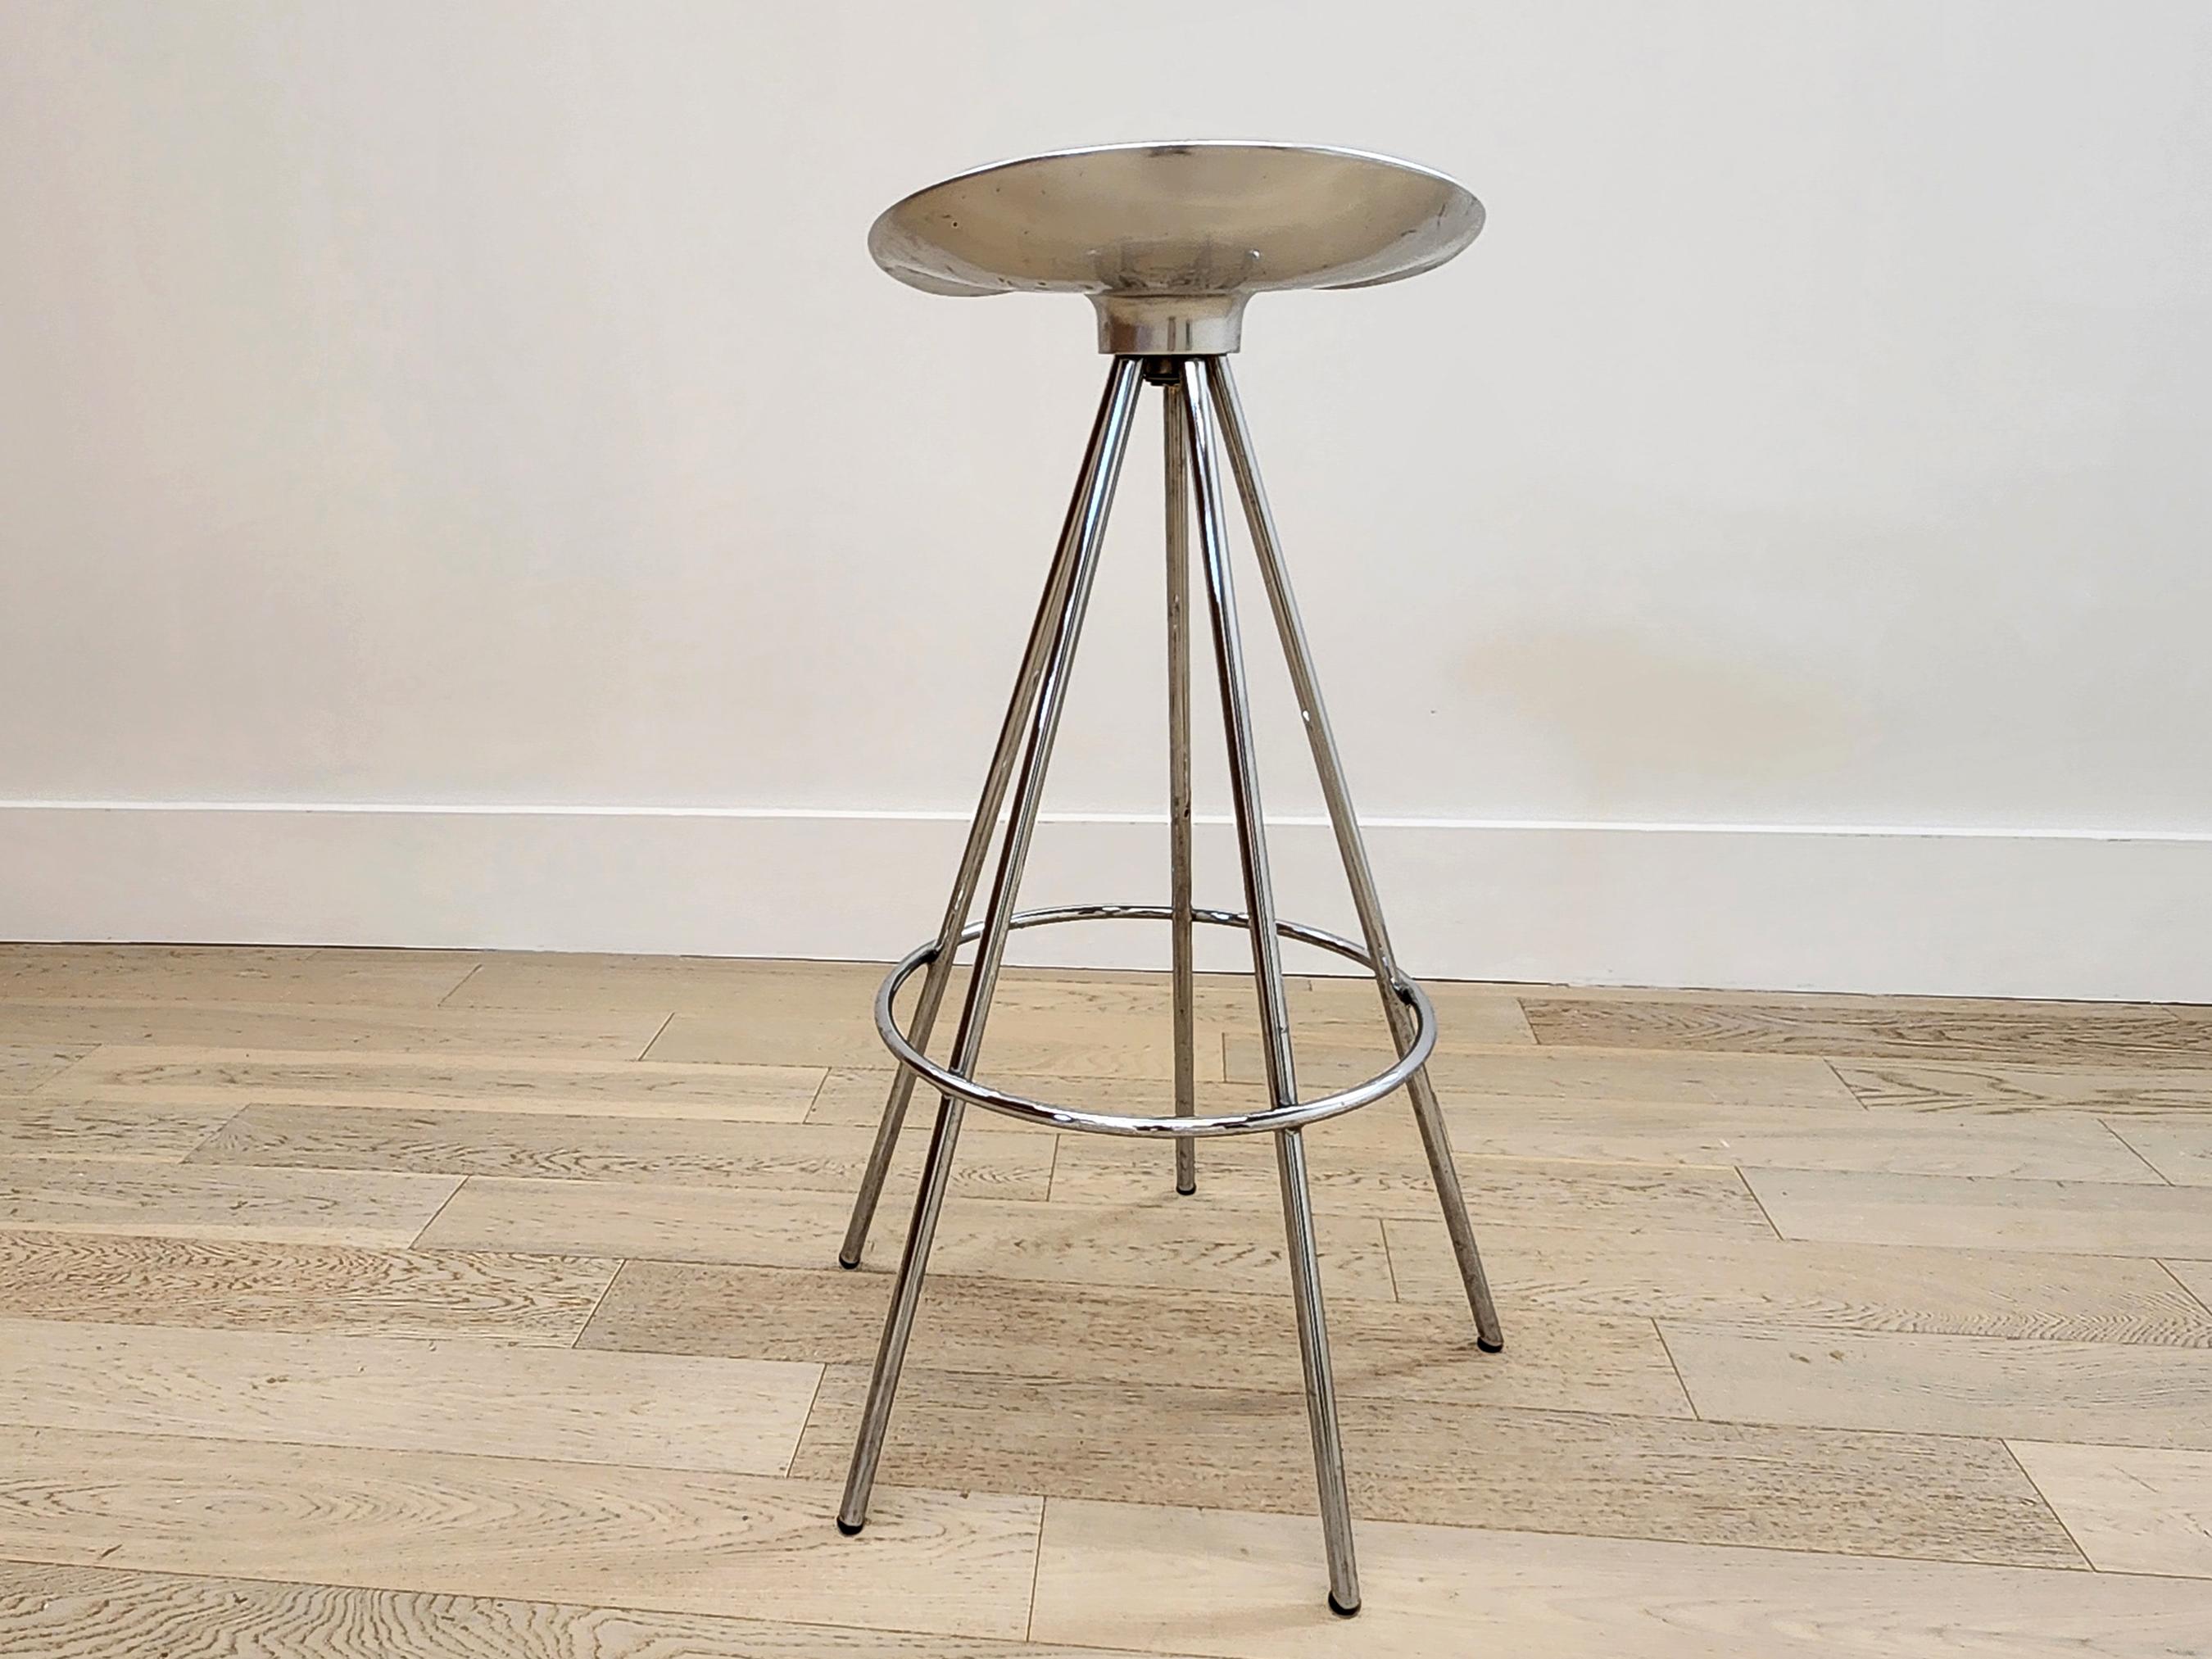 Knoll 'Jamaica' Stainless Steel Counter / Bar Stool by Pepe Cortes In Good Condition For Sale In Stratford, CT